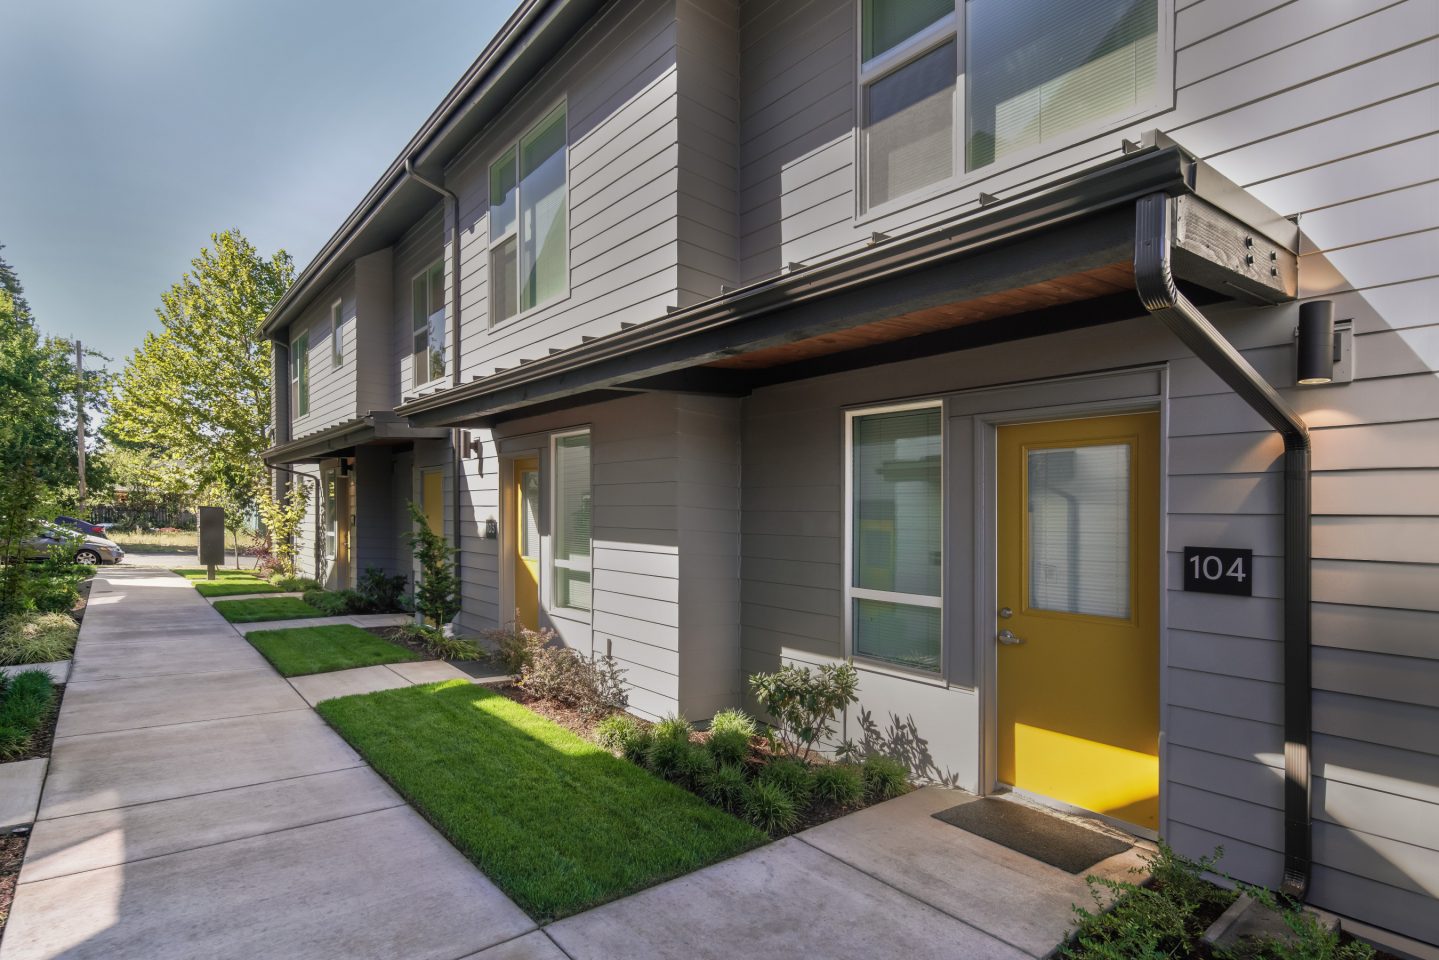 Yellow Doors At The Front And Back Of The Apartments Provide Lead Residents Into Pathways To Community Areas.